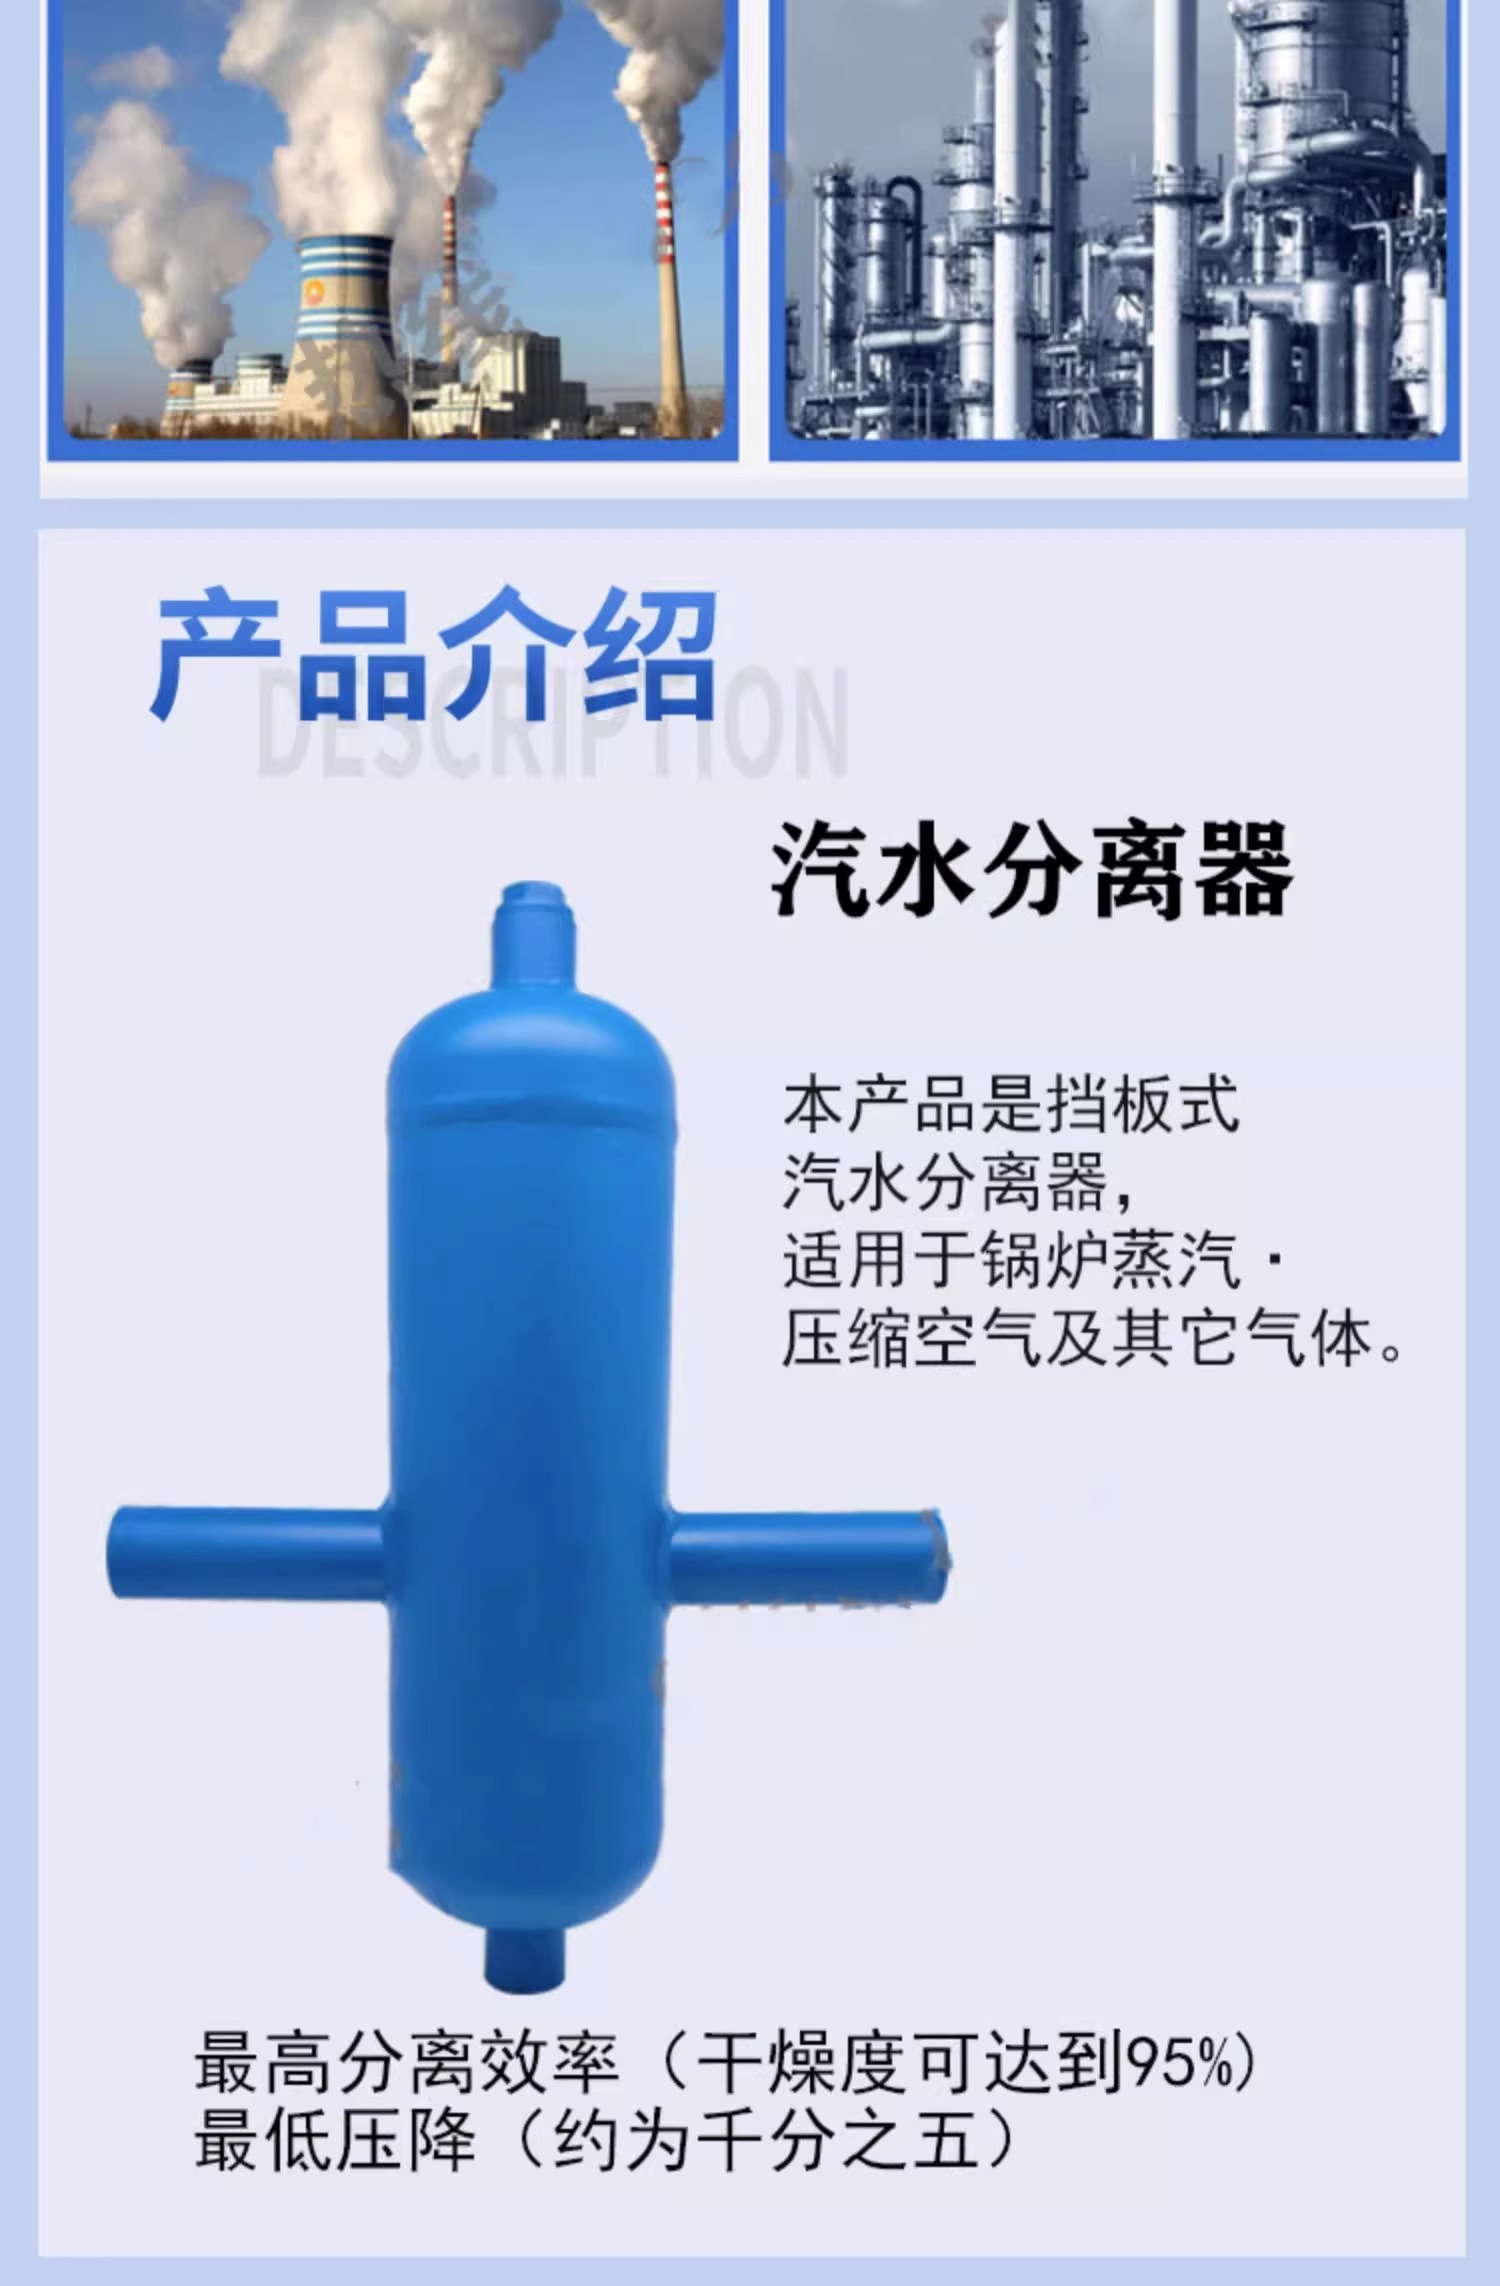 Steam water separator boiler oil gas separator cyclone baffle type automatic drainage gas water filter